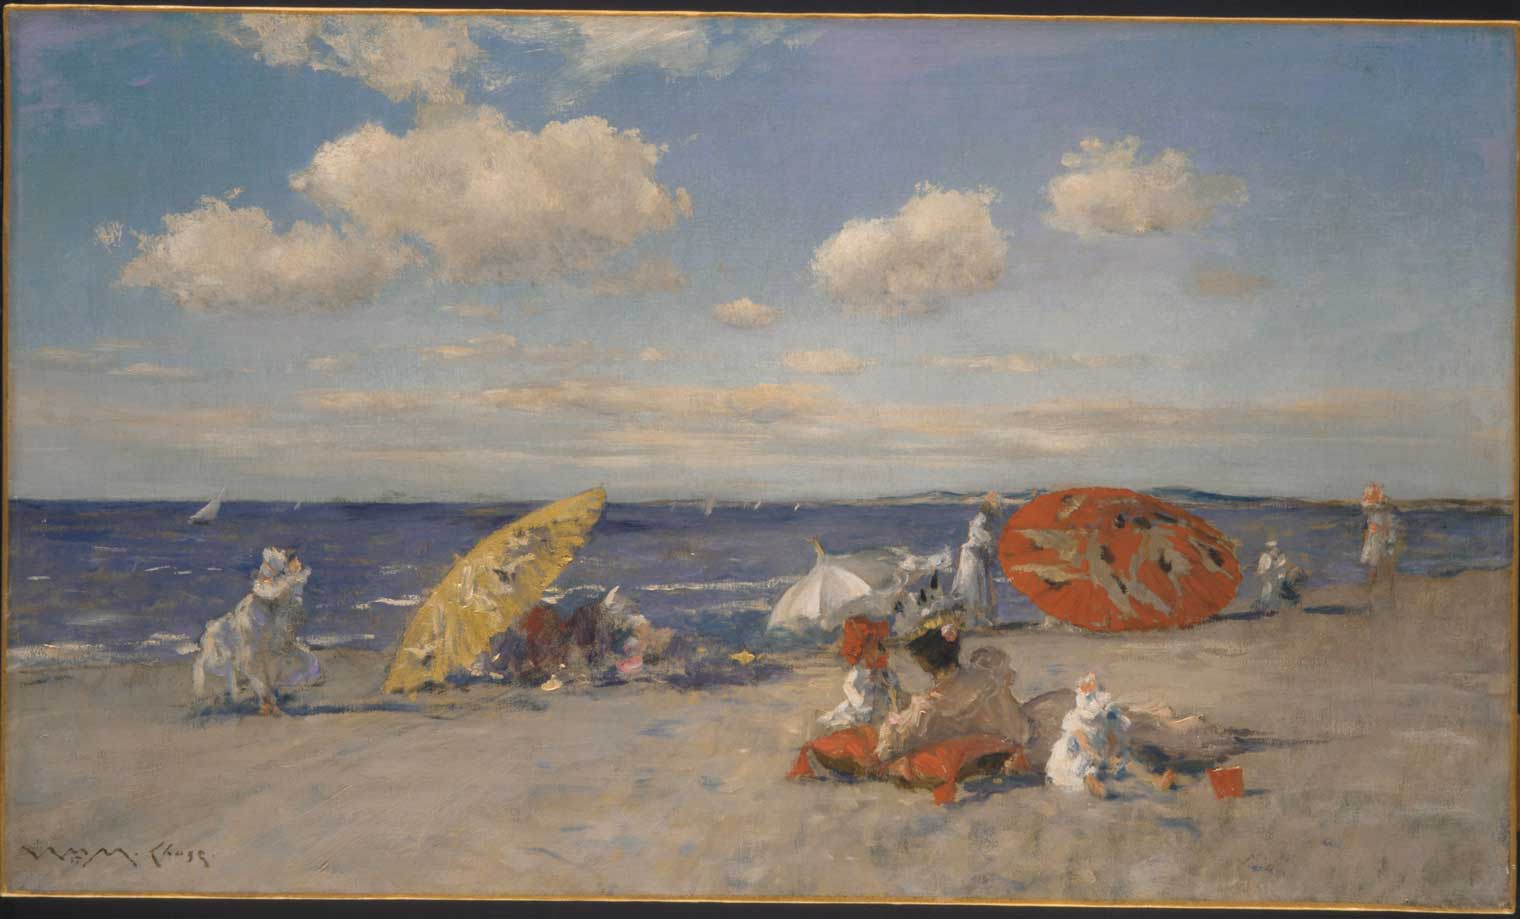 An oil painting of a beach with yellow and orange sun umbrellas, deep blue ocean, white clouds, and various figures